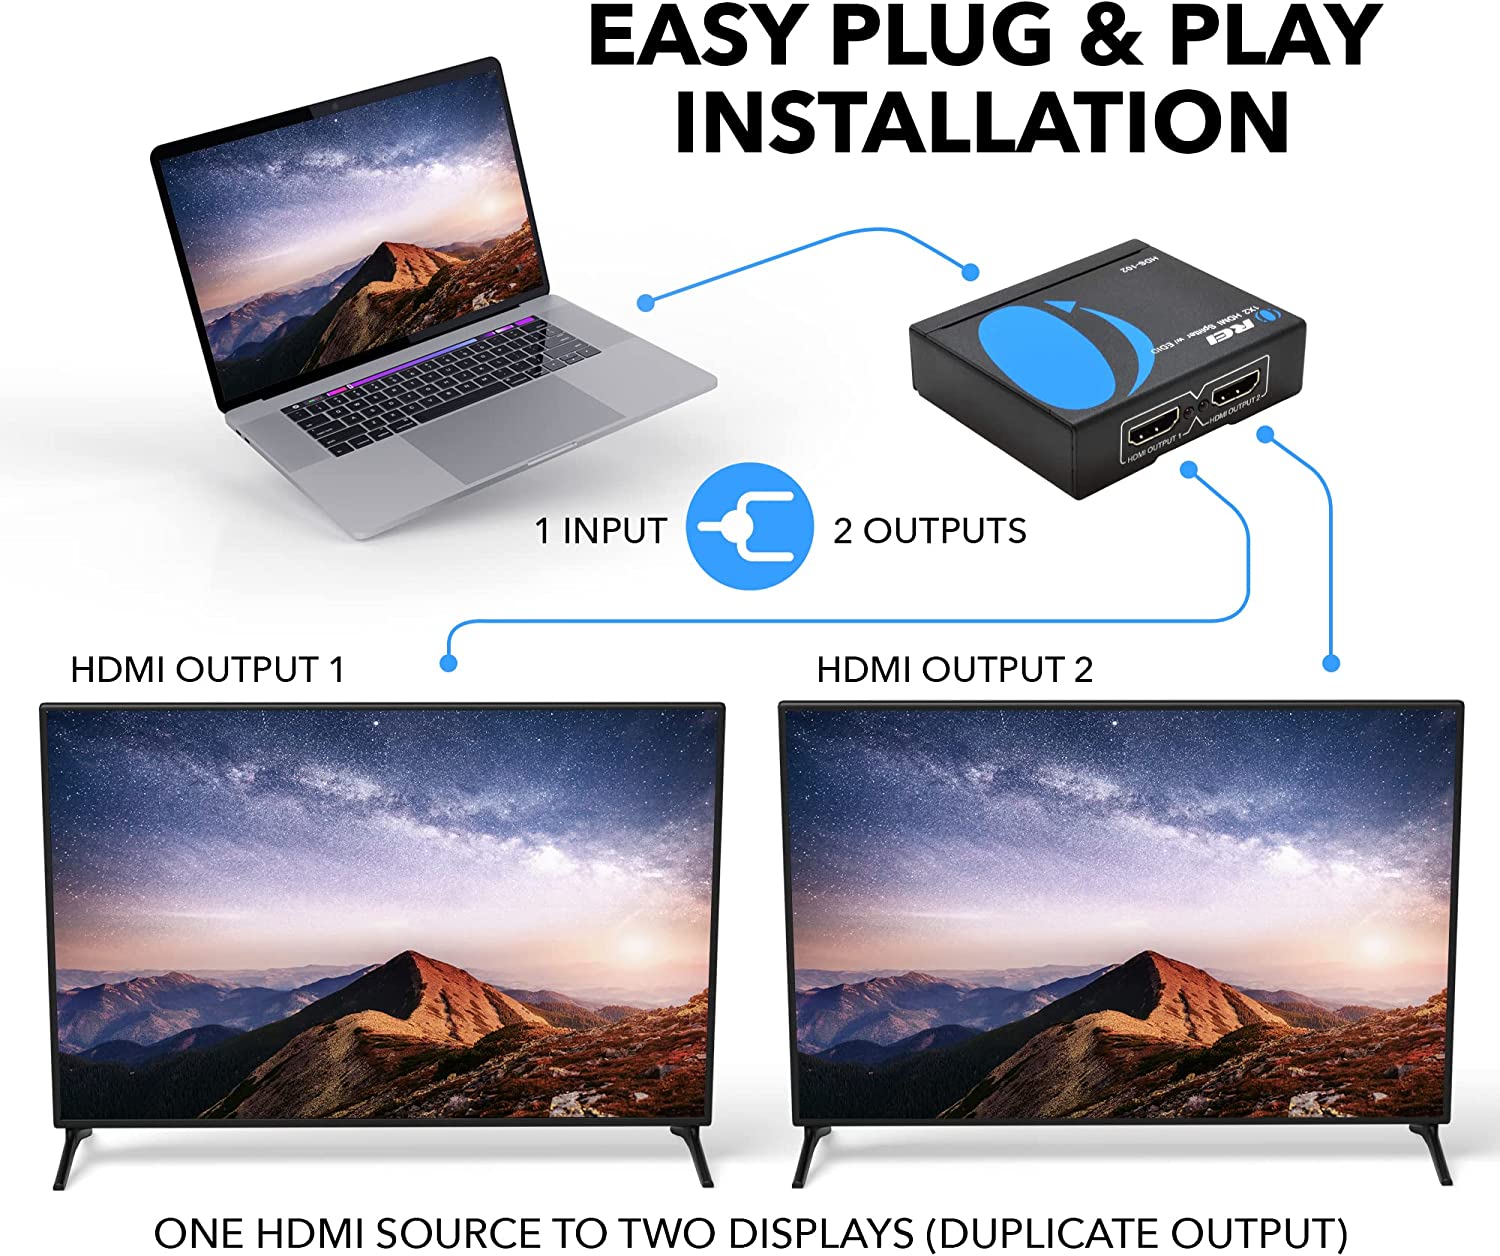 OREI HDMI Splitter 1 in 2 Out 4K - 1x2 HDMI Display Duplicate:Mirror - Powered Splitter Full HD 1080P, 4K @ 30Hz (One Input To Two Outputs) - USB Cable